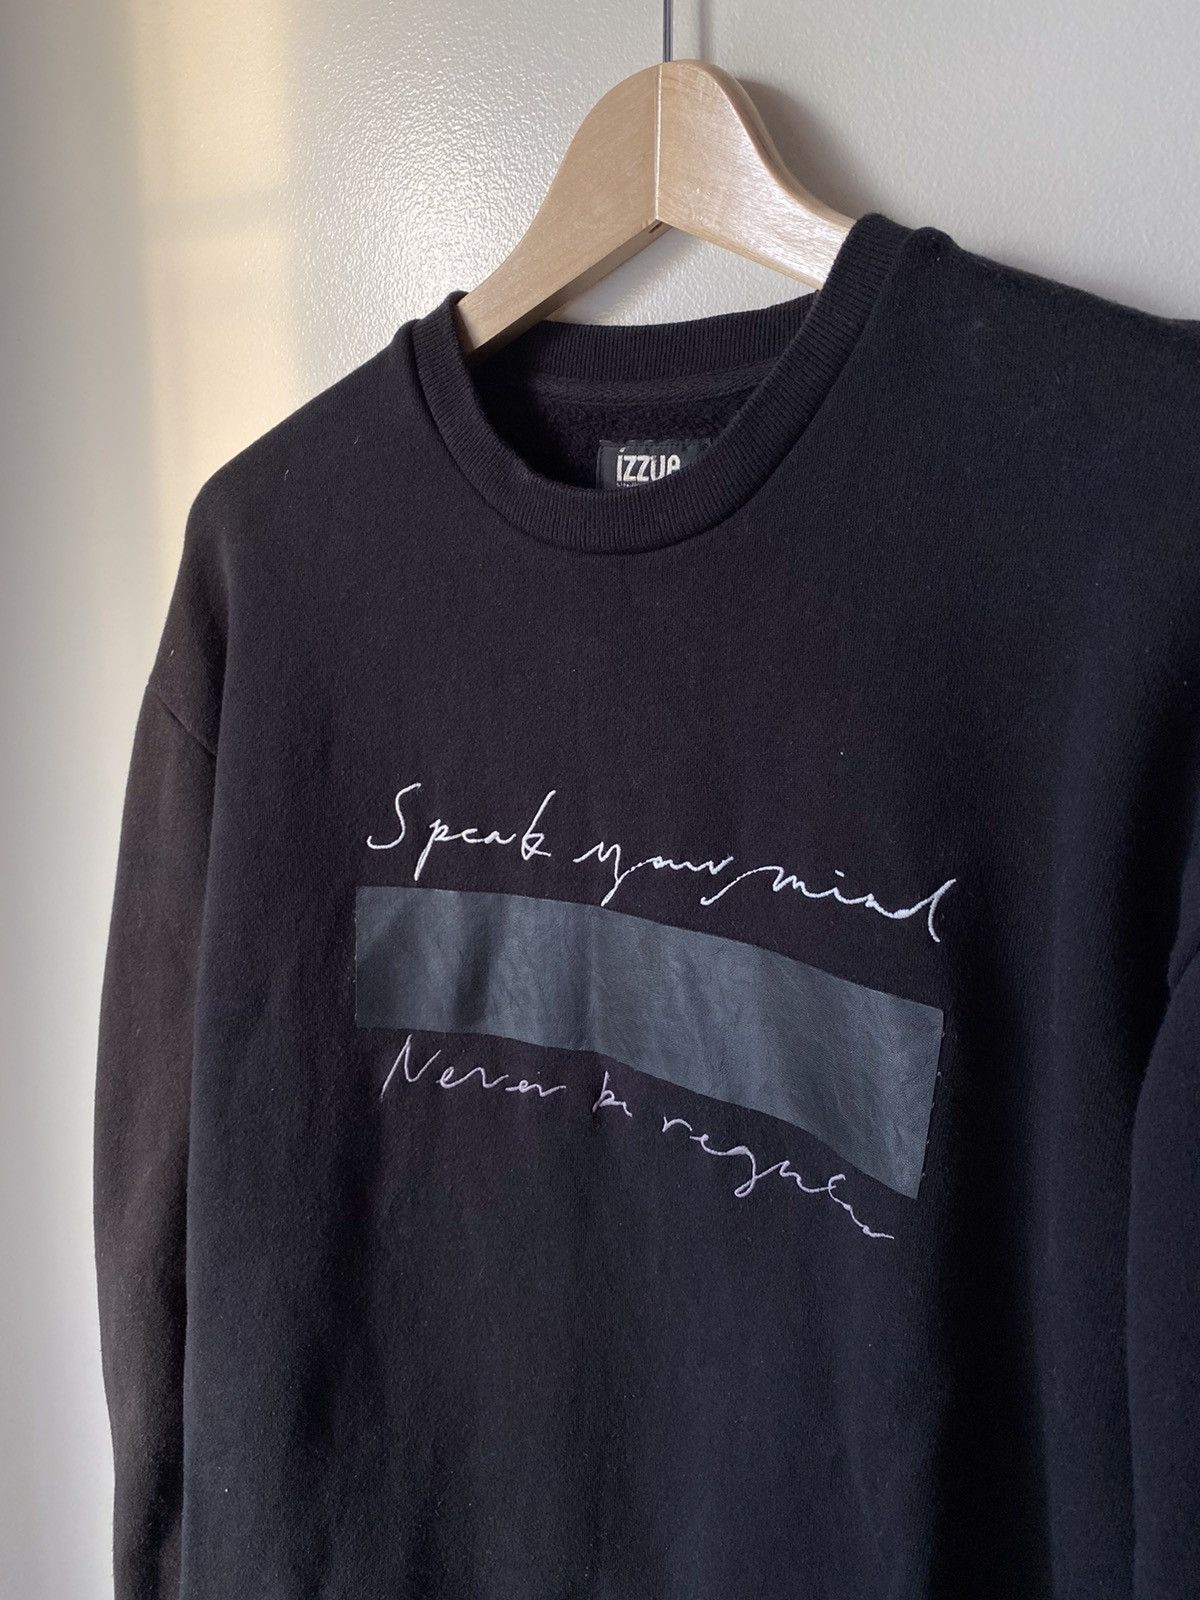 Japanese Brand Izzue sweater rare embroidered | Grailed